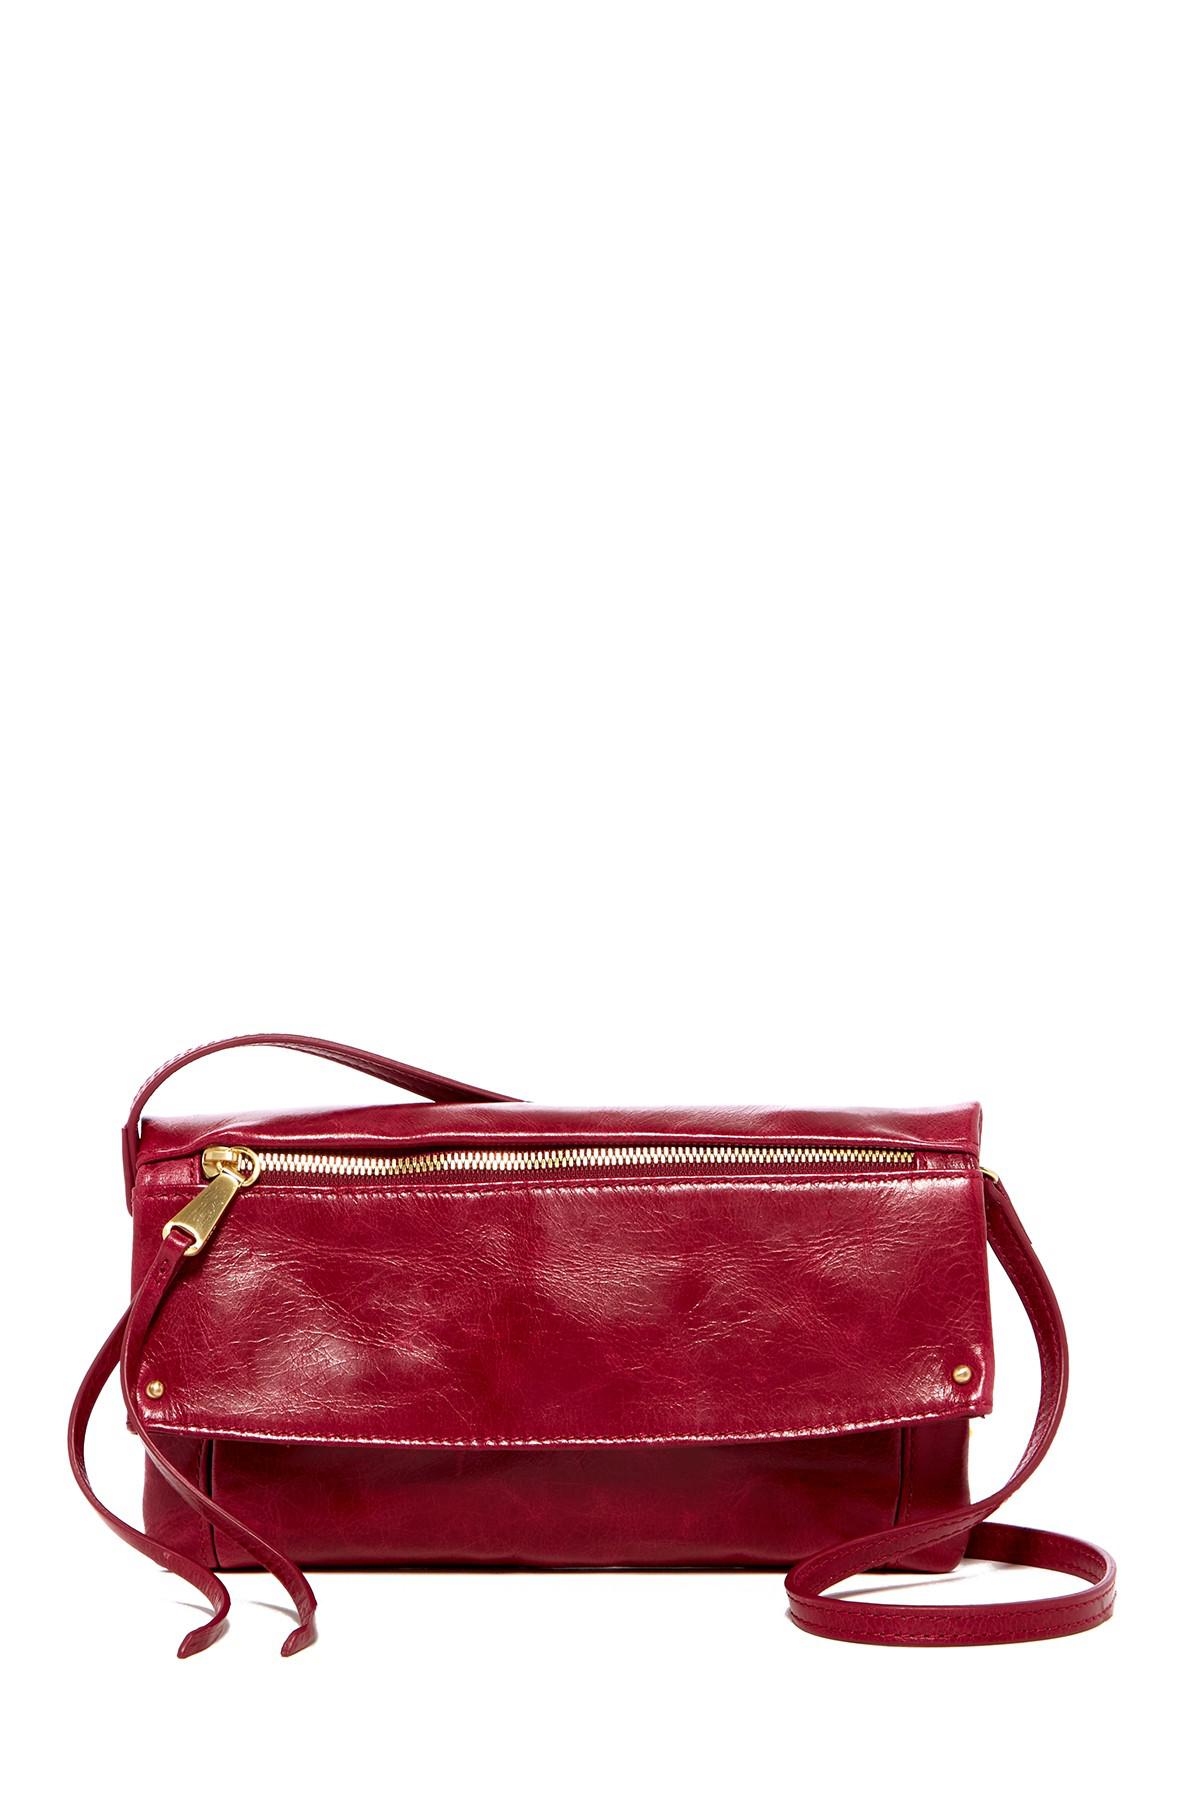 Hobo Rudy Leather Crossbody Bag in Red - Lyst